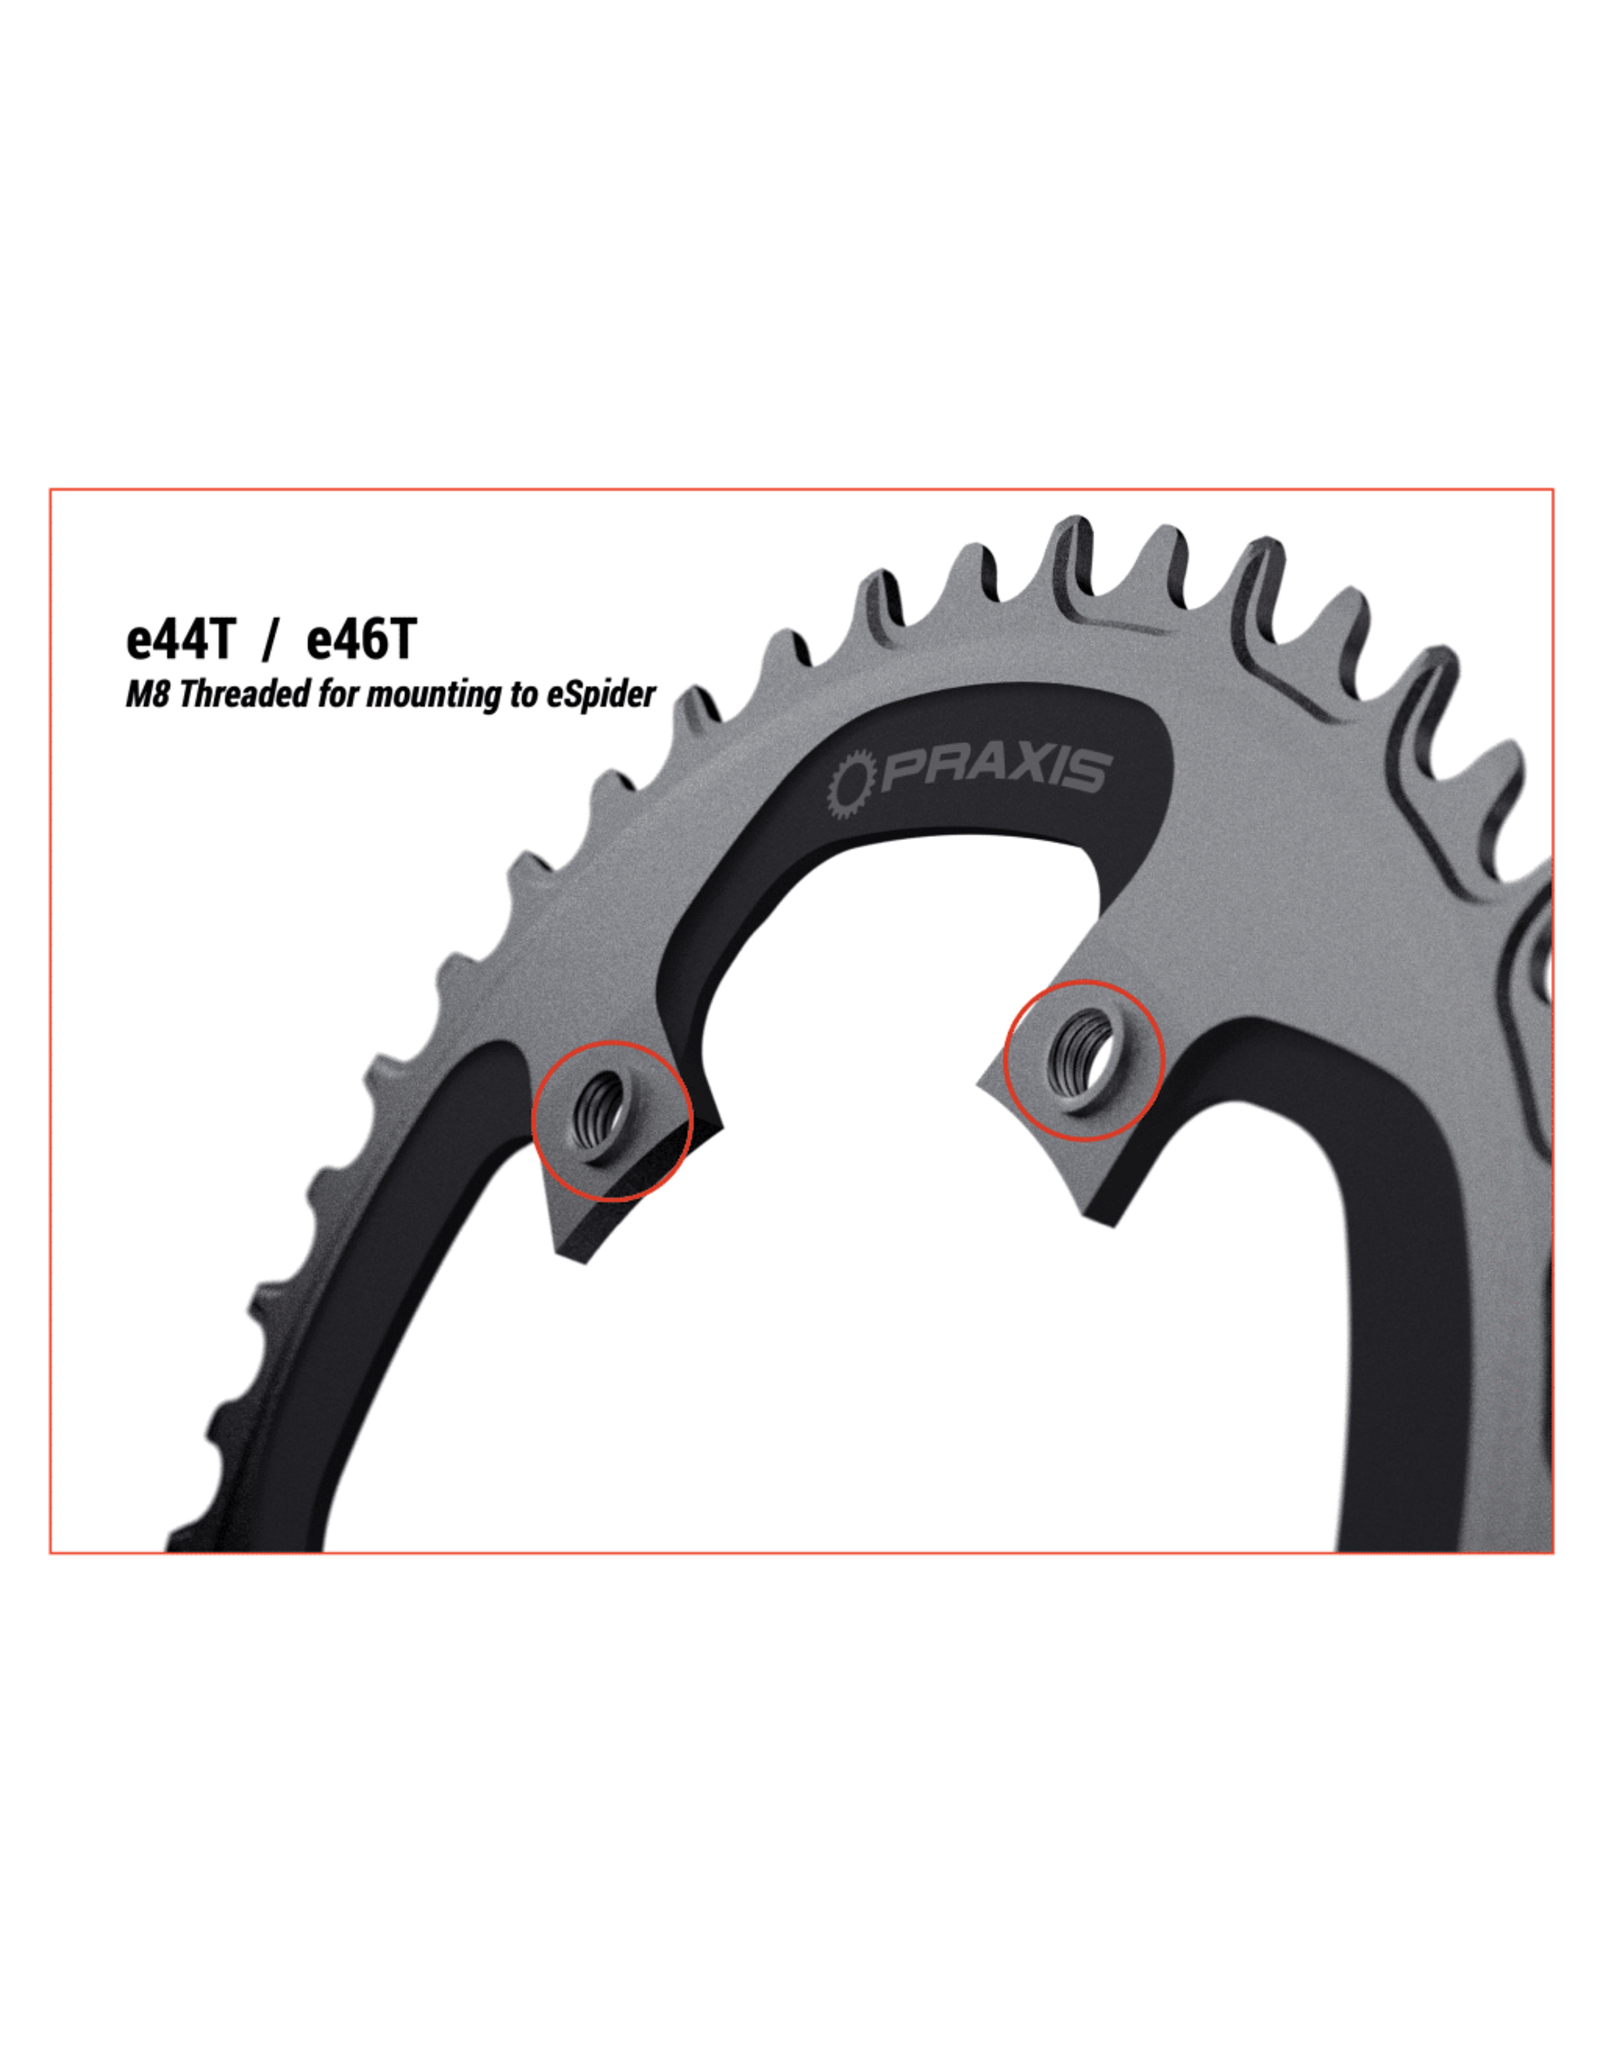 Praxis Works Praxis N/W 1X 110 BCD Road / Cyclocross / Gravel Chainring